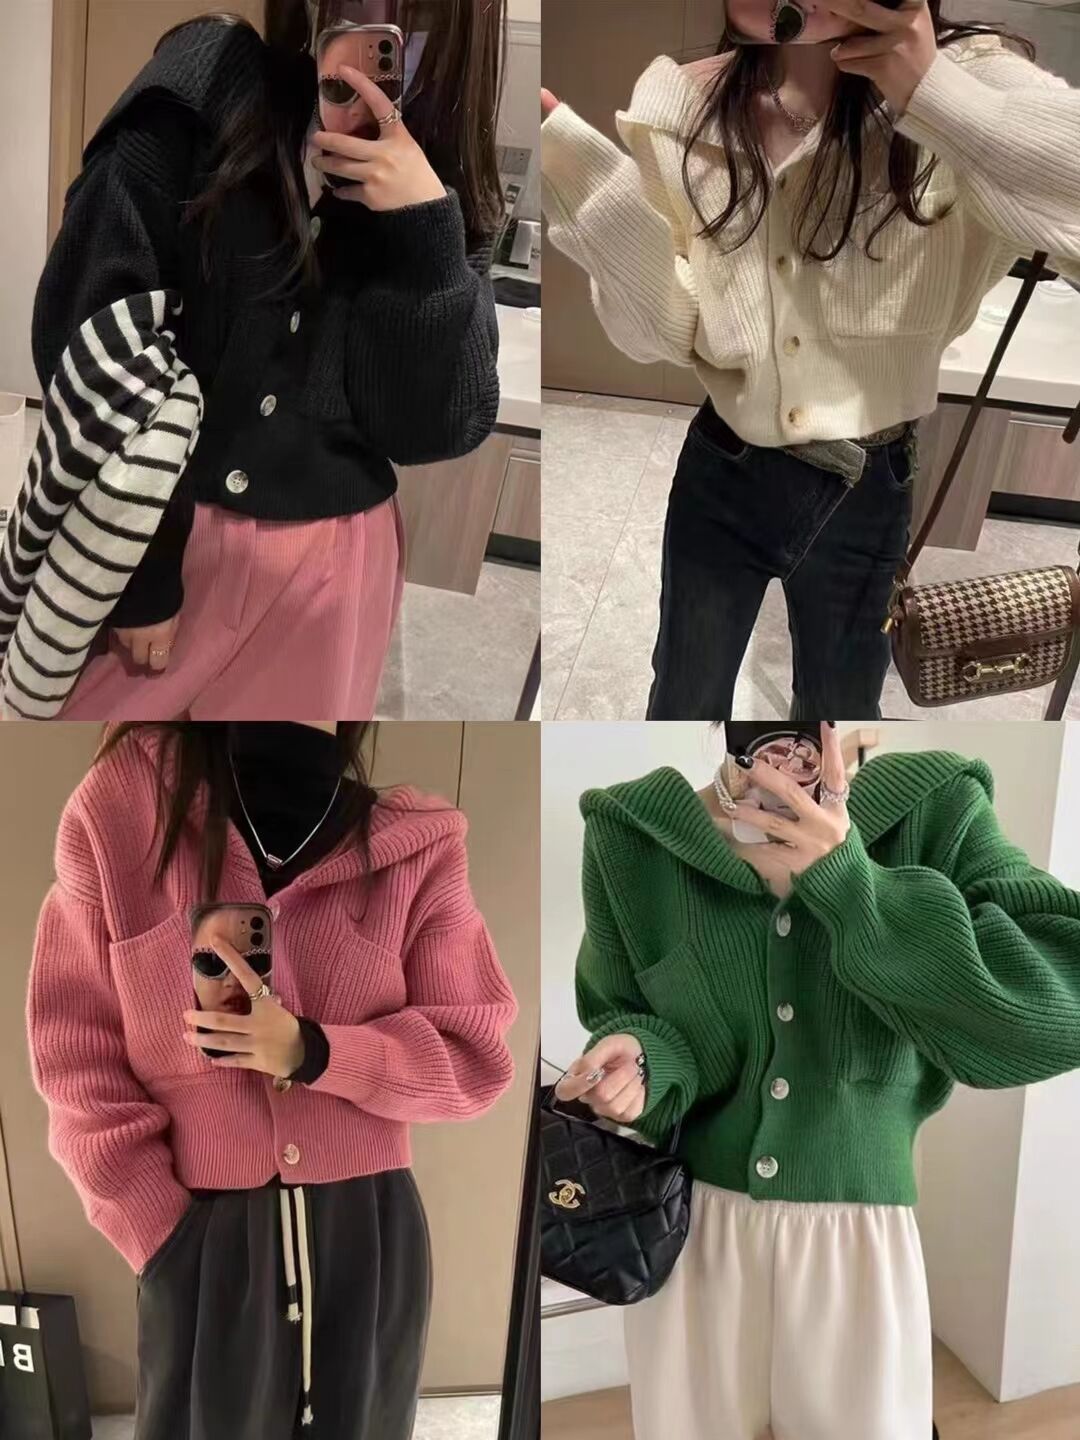 Hooded sweater jacket women's autumn clothes new lazy wind top gentle loose outerwear chic short knitted cardigan